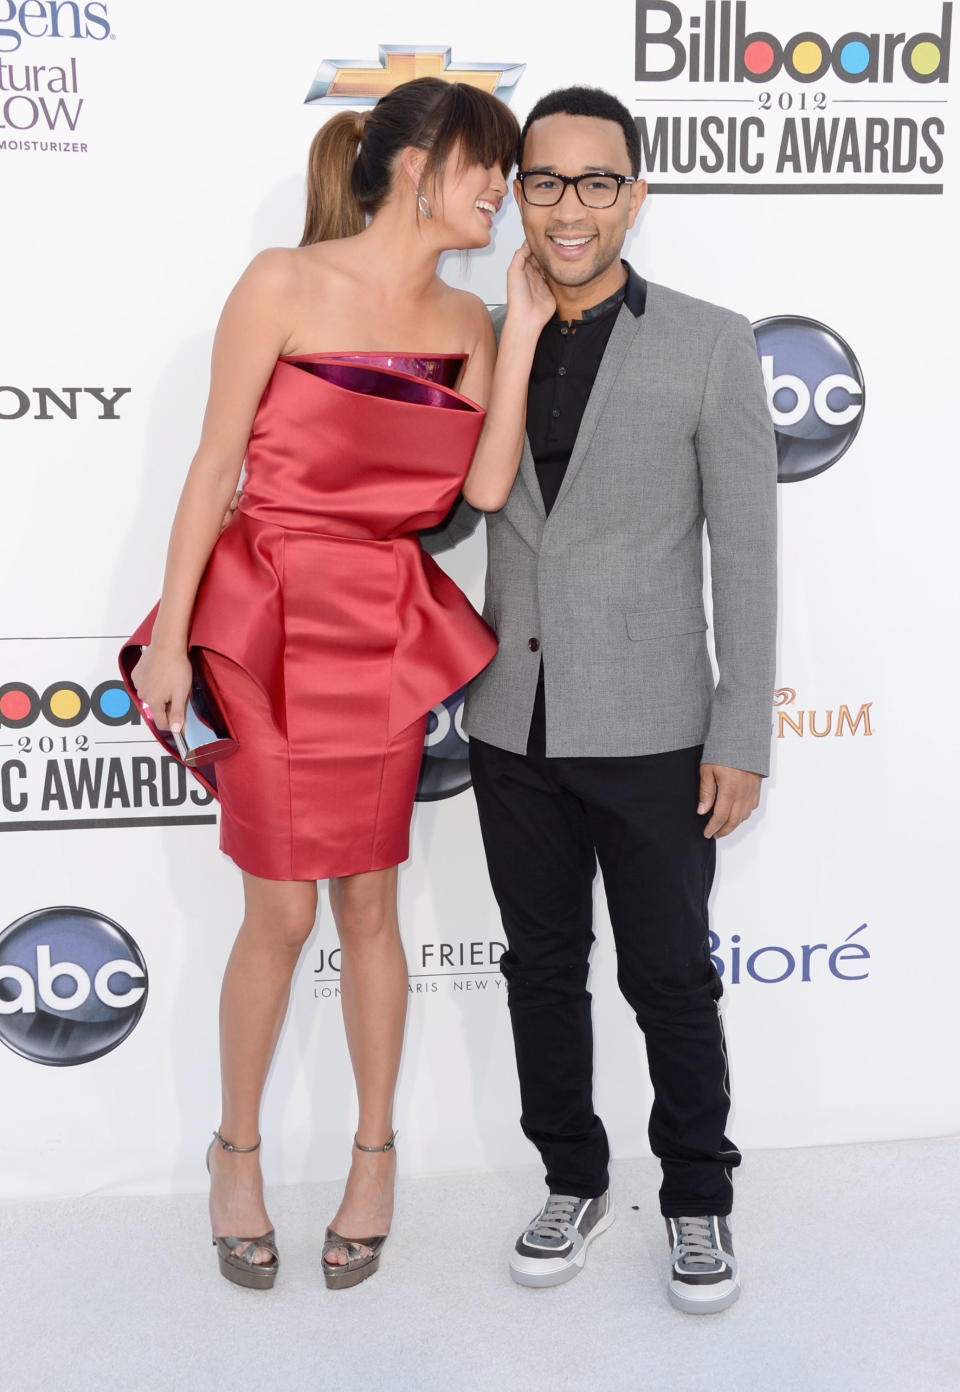 LAS VEGAS, NV - MAY 20: Model Chrissy Teigen and musician John Legend arrives at the 2012 Billboard Music Awards held at the MGM Grand Garden Arena on May 20, 2012 in Las Vegas, Nevada. (Photo by Frazer Harrison/Getty Images for ABC)